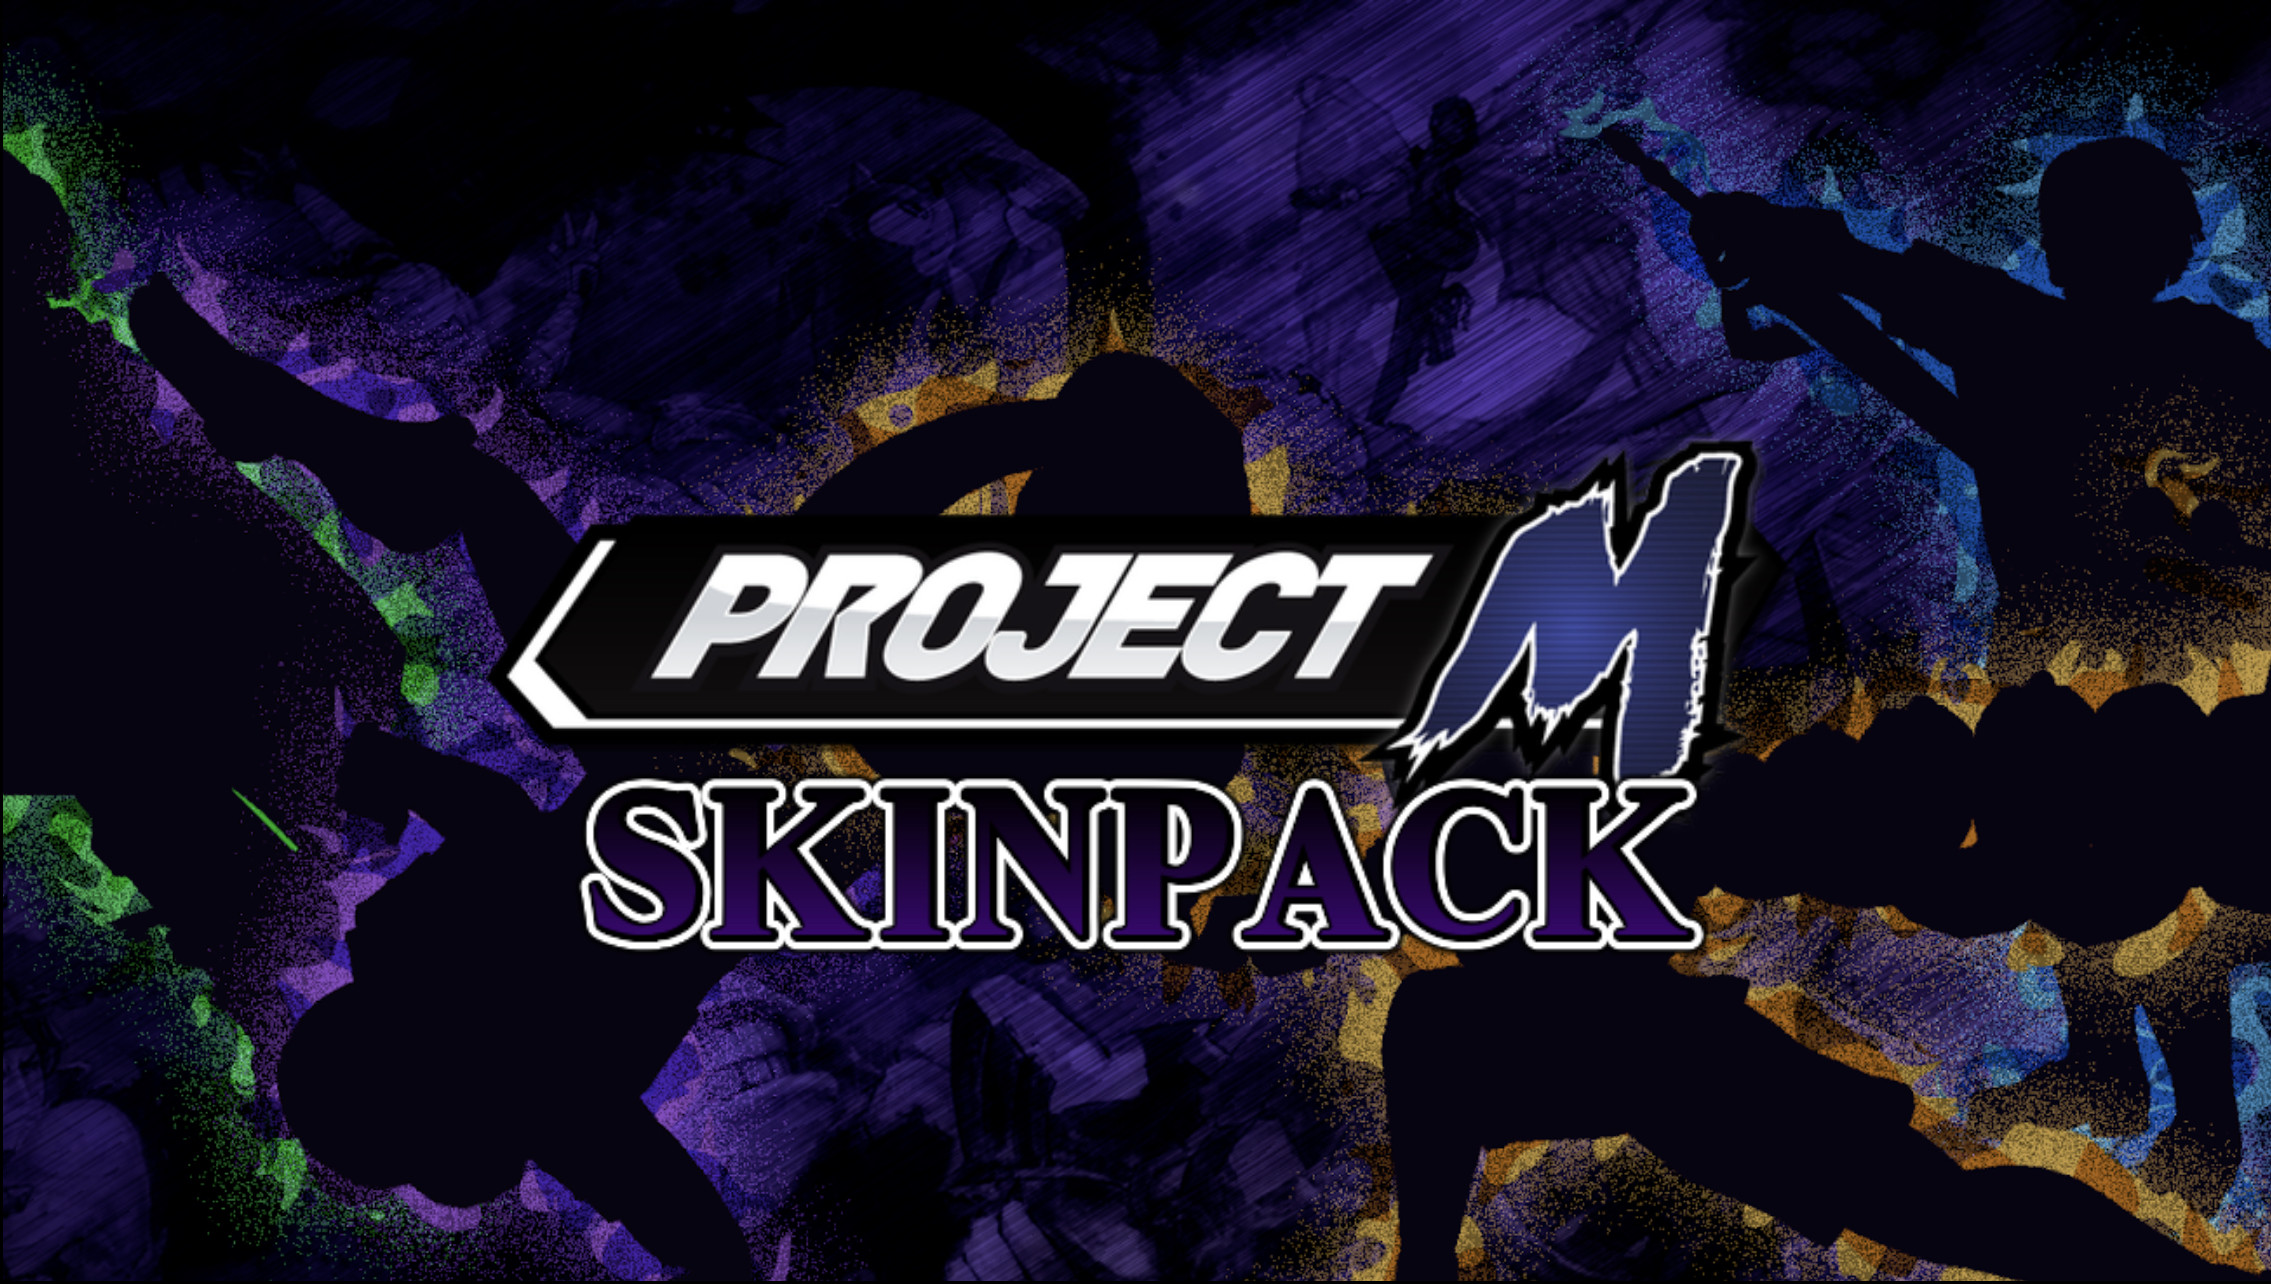 Project M Wallpapers